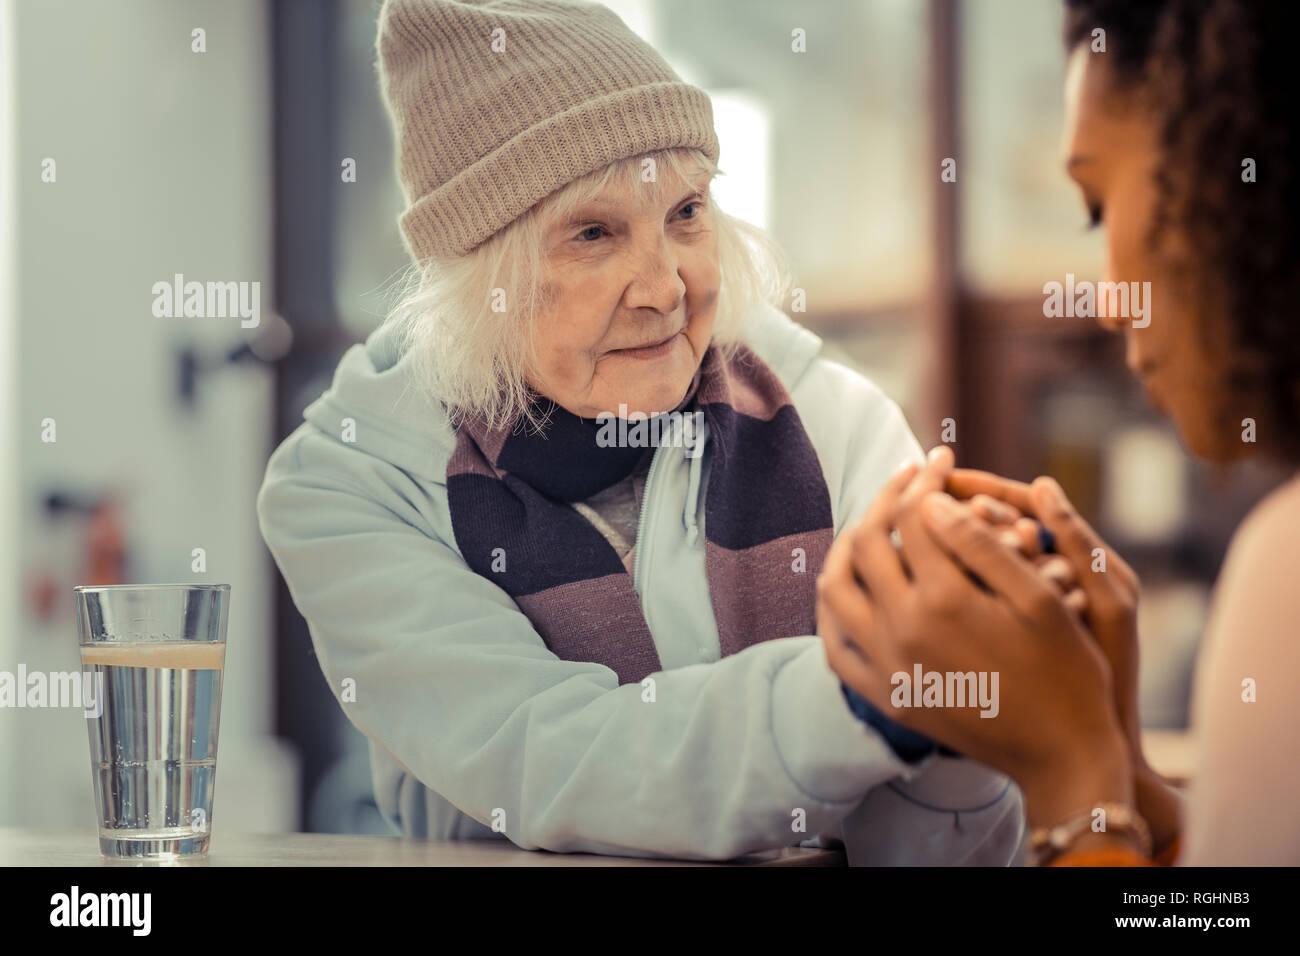 Tired aged woman looking at her helper Stock Photo